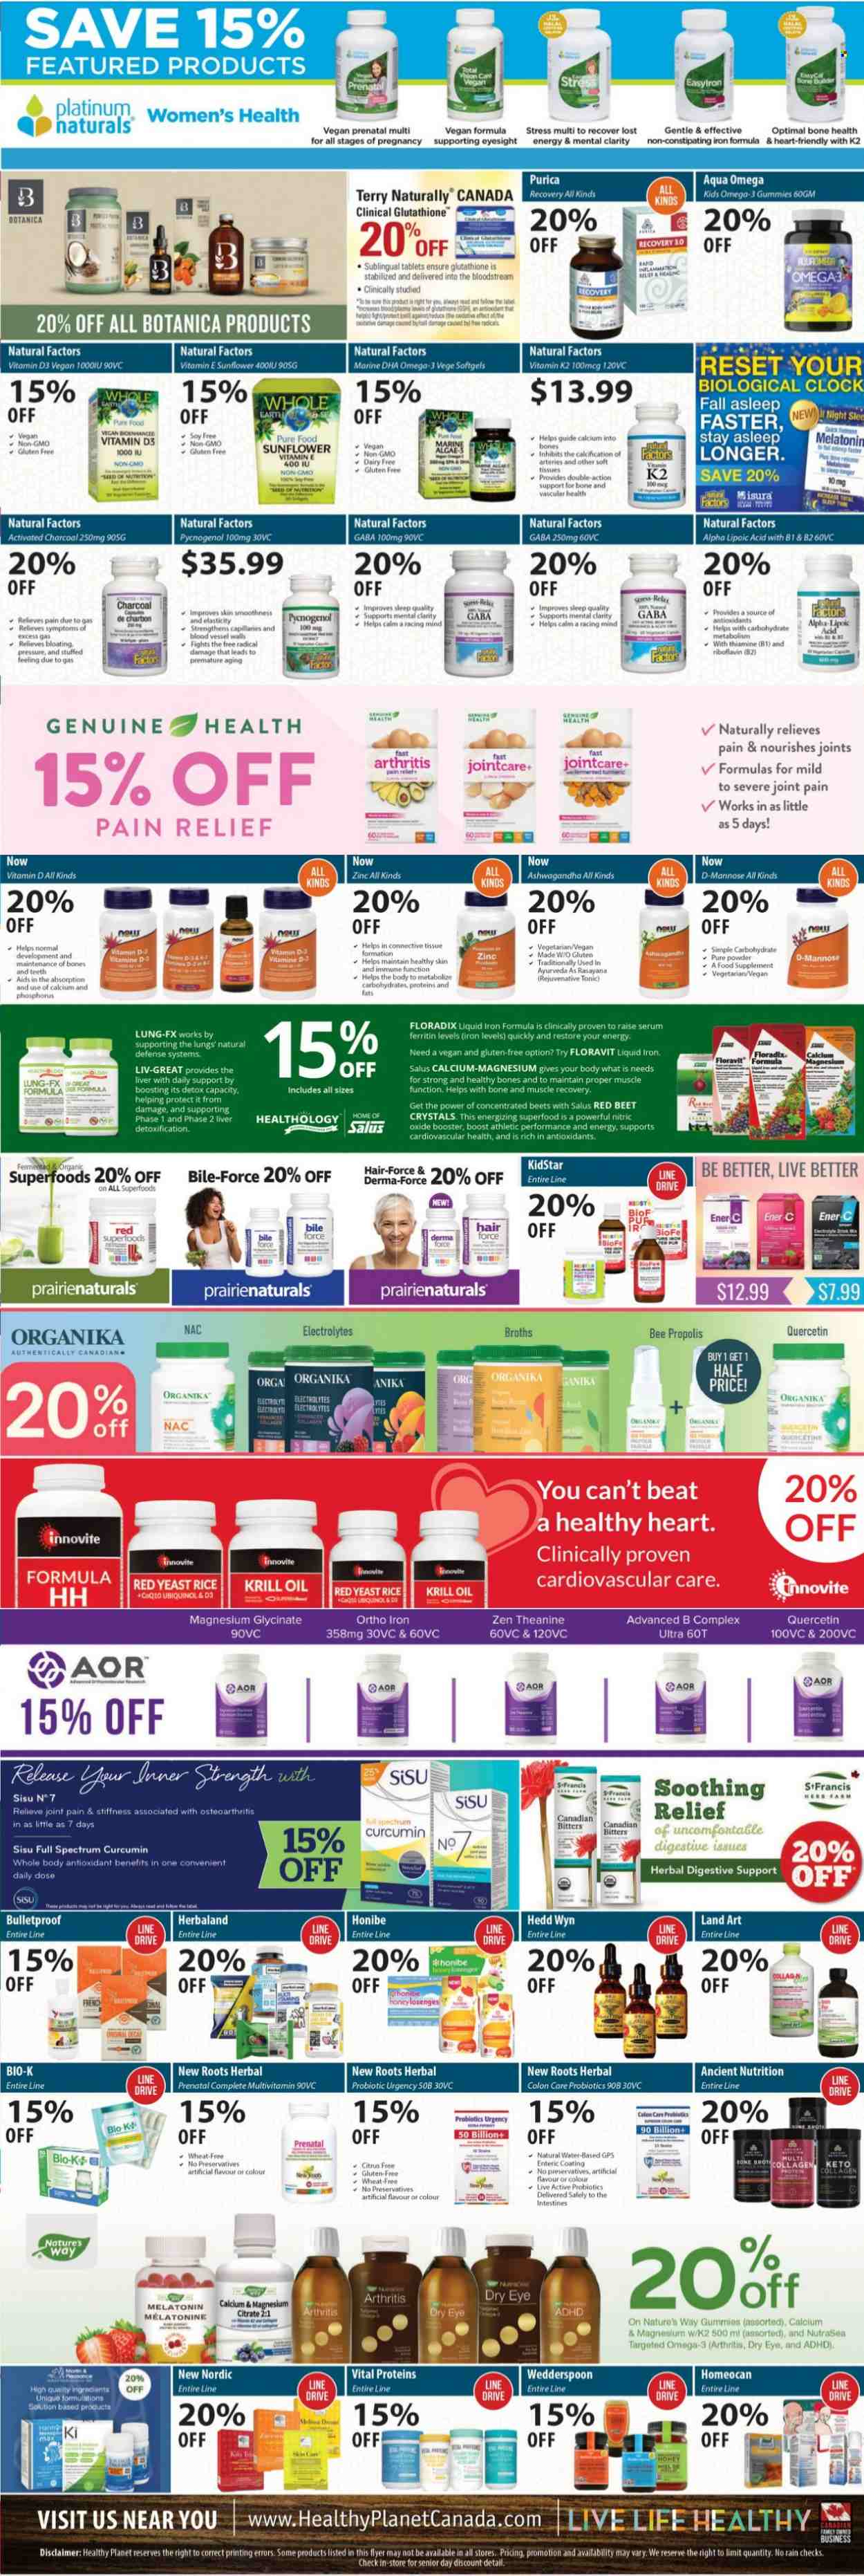 thumbnail - Healthy Planet Flyer - May 12, 2022 - June 15, 2022 - Sales products - 7 Days, bouillon, rice, turmeric, oil, honey, tonic, Boost, tissues, serum, Sure, pain relief, magnesium, multivitamin, Prenatal, probiotics, Omega-3, activated charcoal, zinc, Spectrum, Vital Proteins, vitamin D3. Page 5.